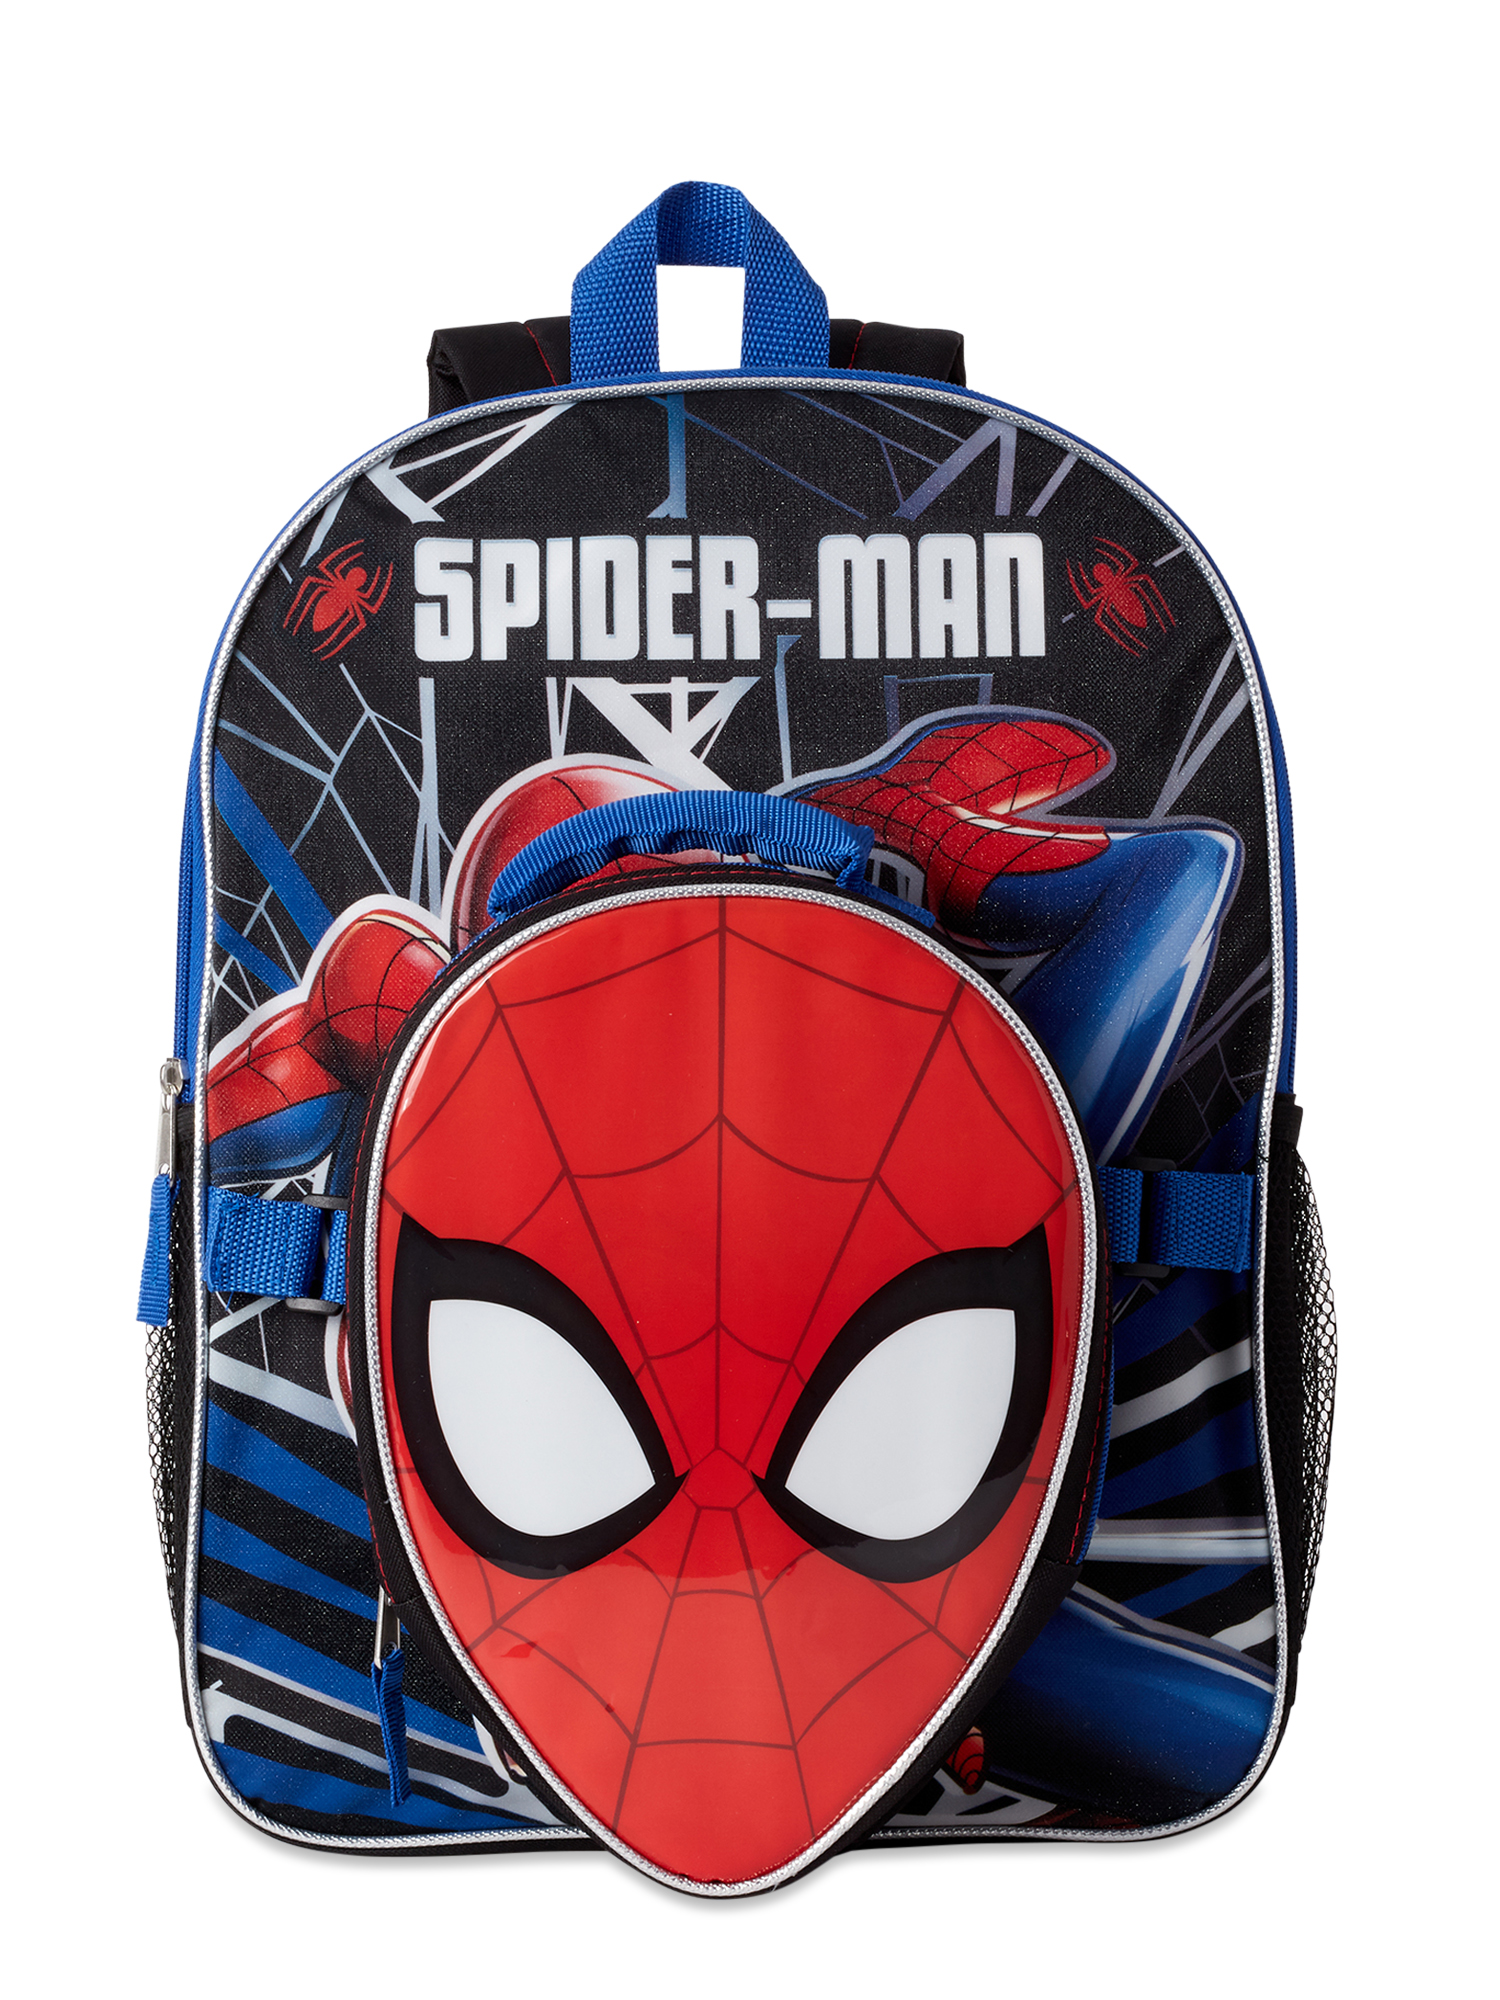 Spider-Man Backpack with Lunch Bag - image 2 of 4